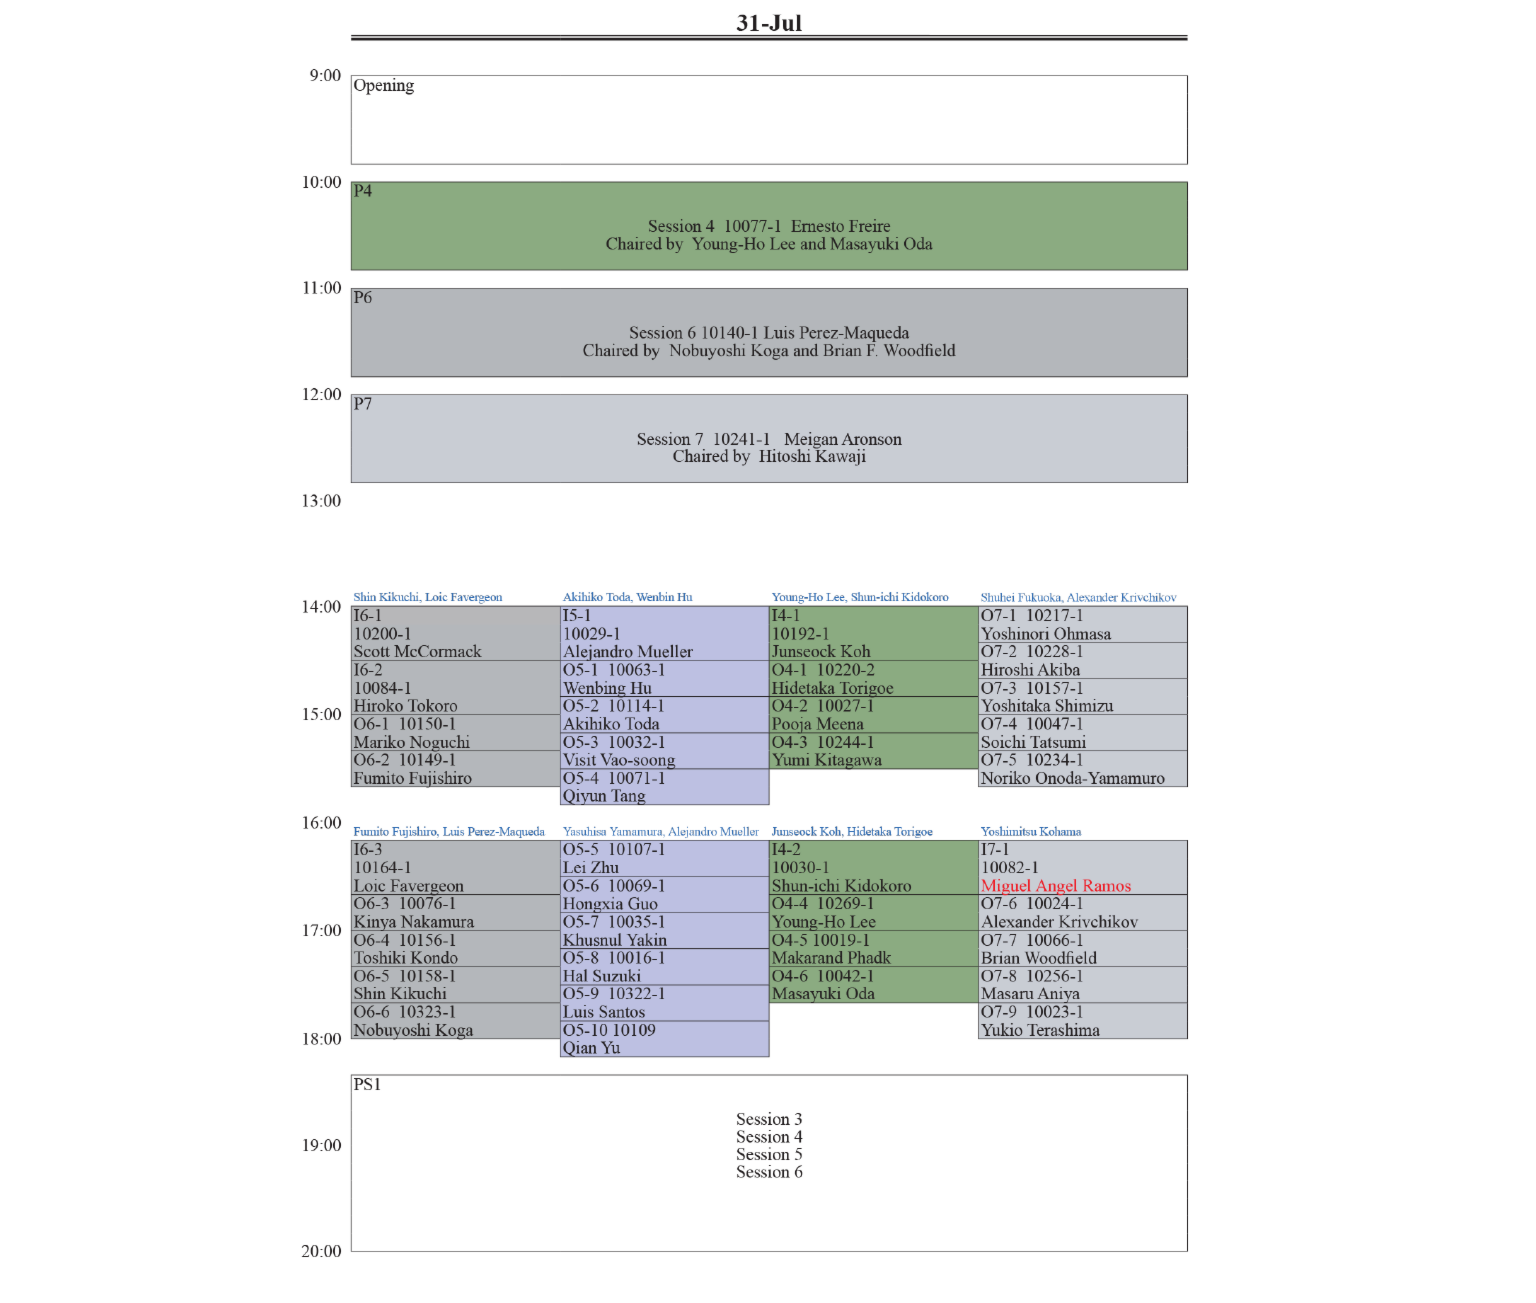 Table_Schedule_ICCT_2i (1)_1_1.png